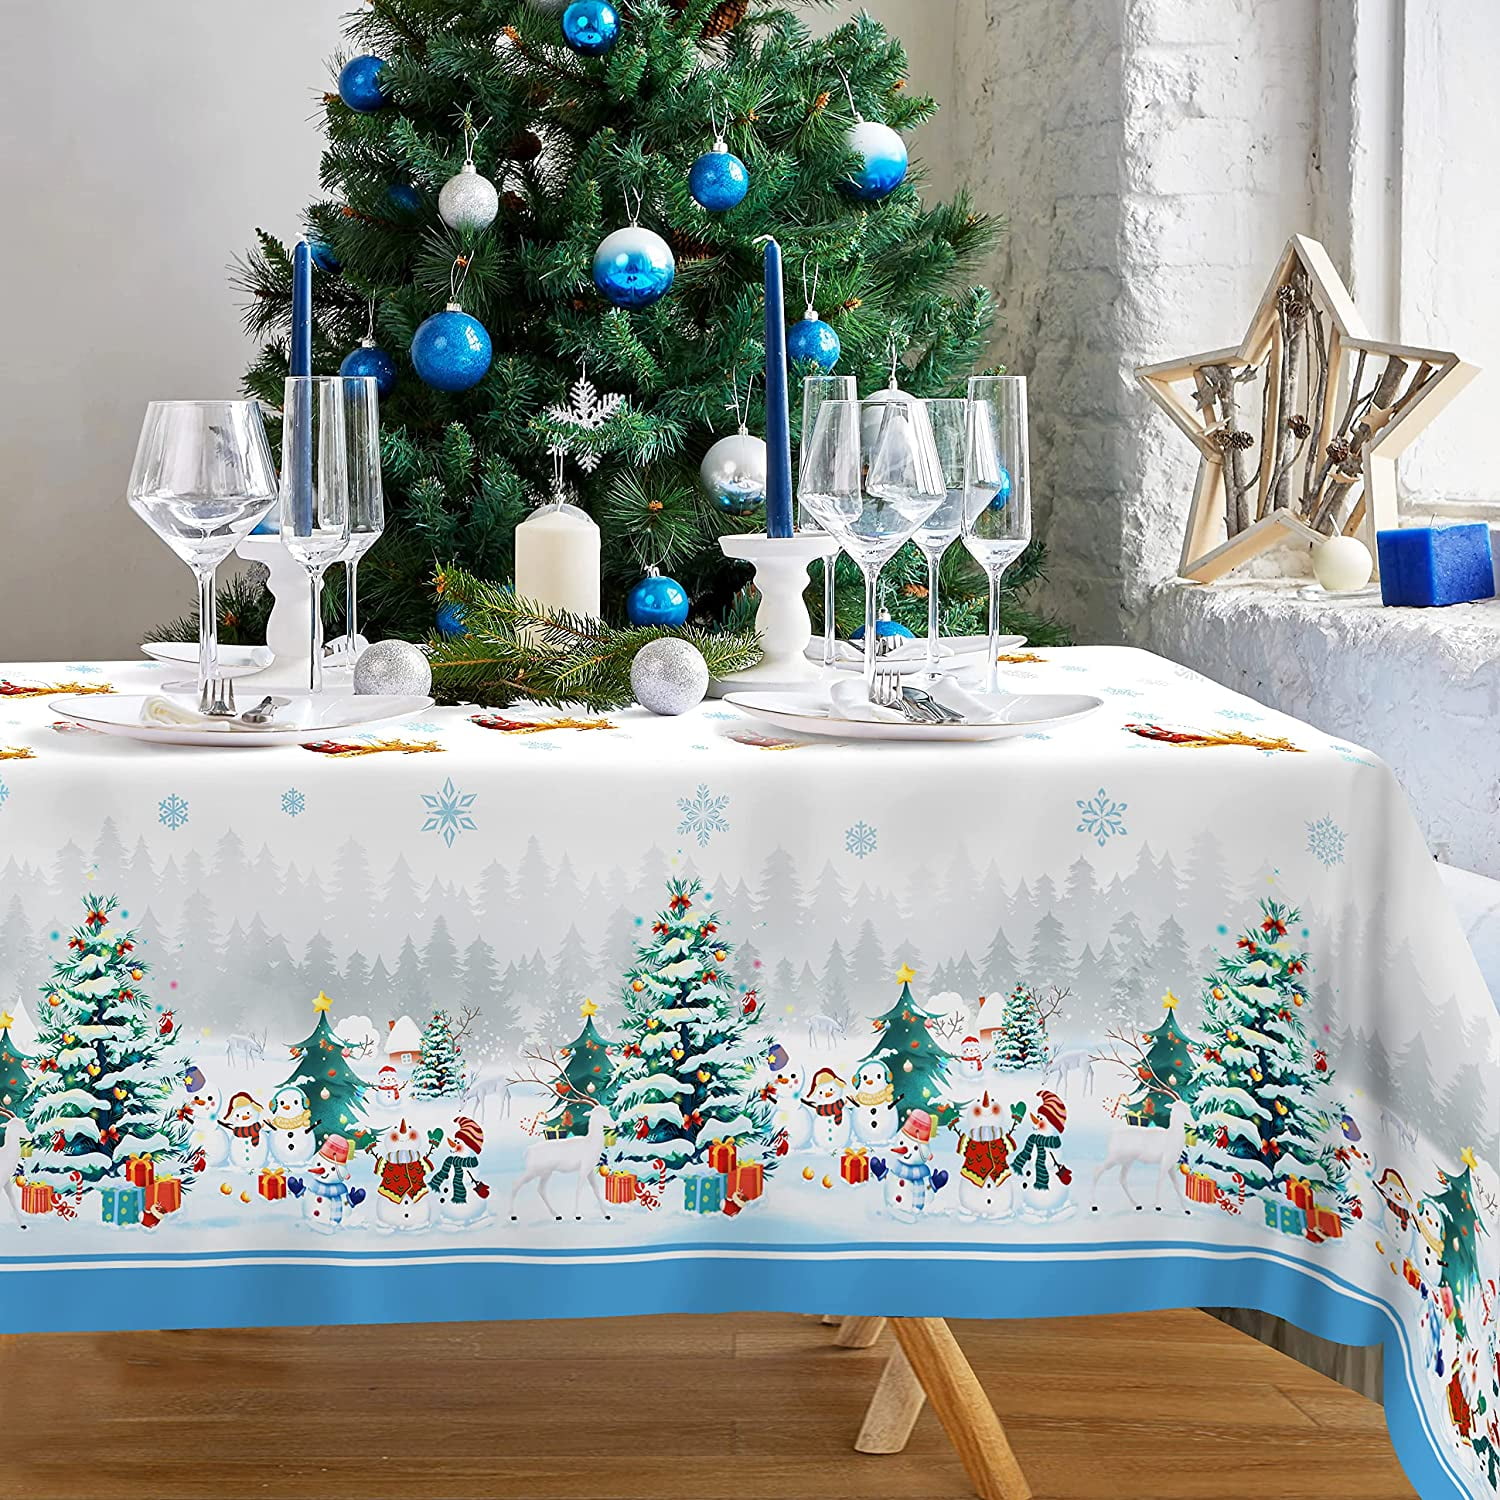 Christmas Table Cloth Rectangle 60" x 84" (6-8 Seats)- Washable Fabric Snowman/Santa/Snowflake Print Winter Tablecloth for Kitchen Dinning, Holiday Dinner - Walmart.com